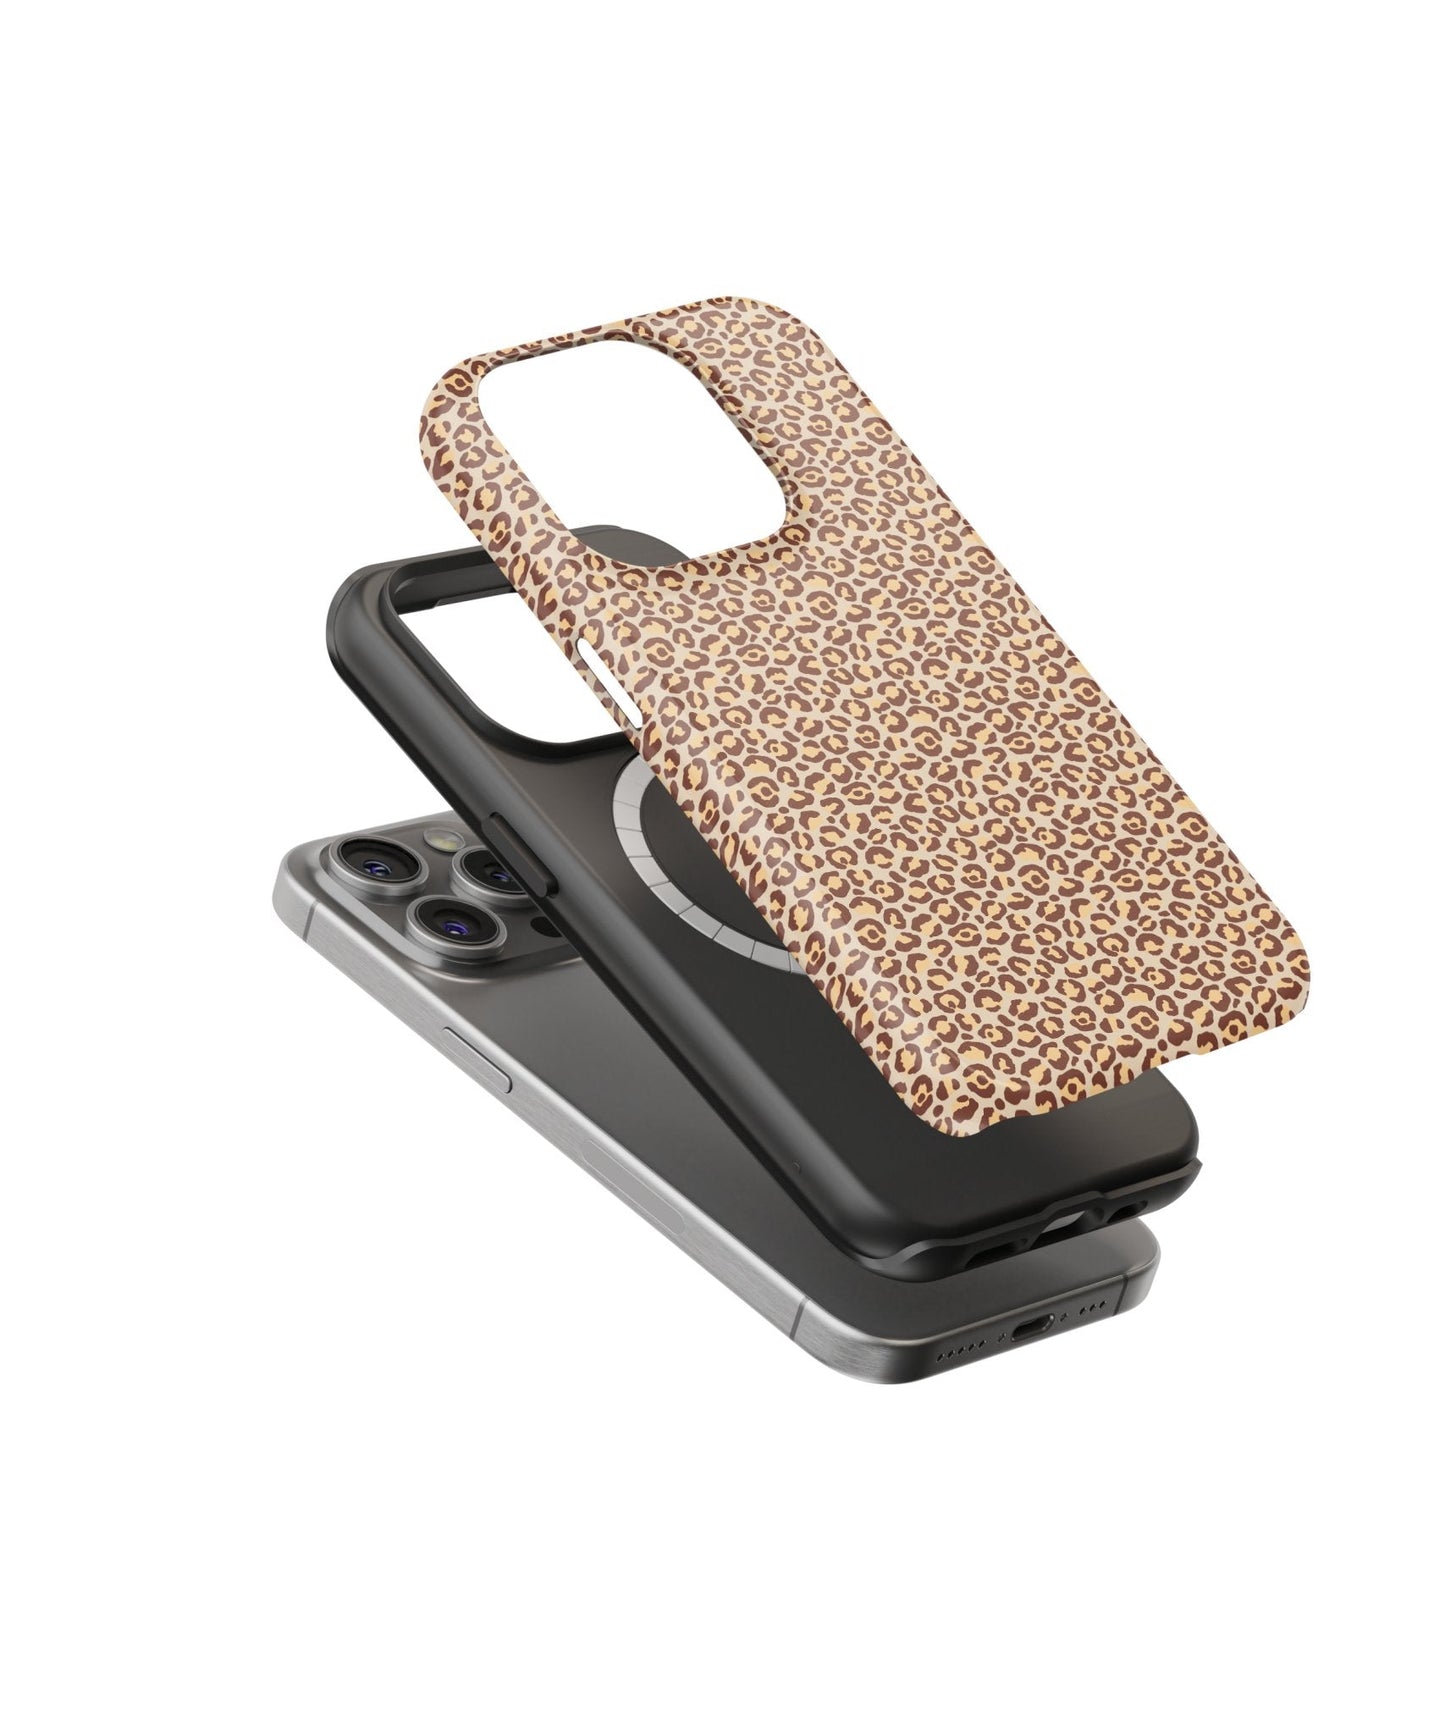 Leopard Dreams in the Moonlight - iPhone Case